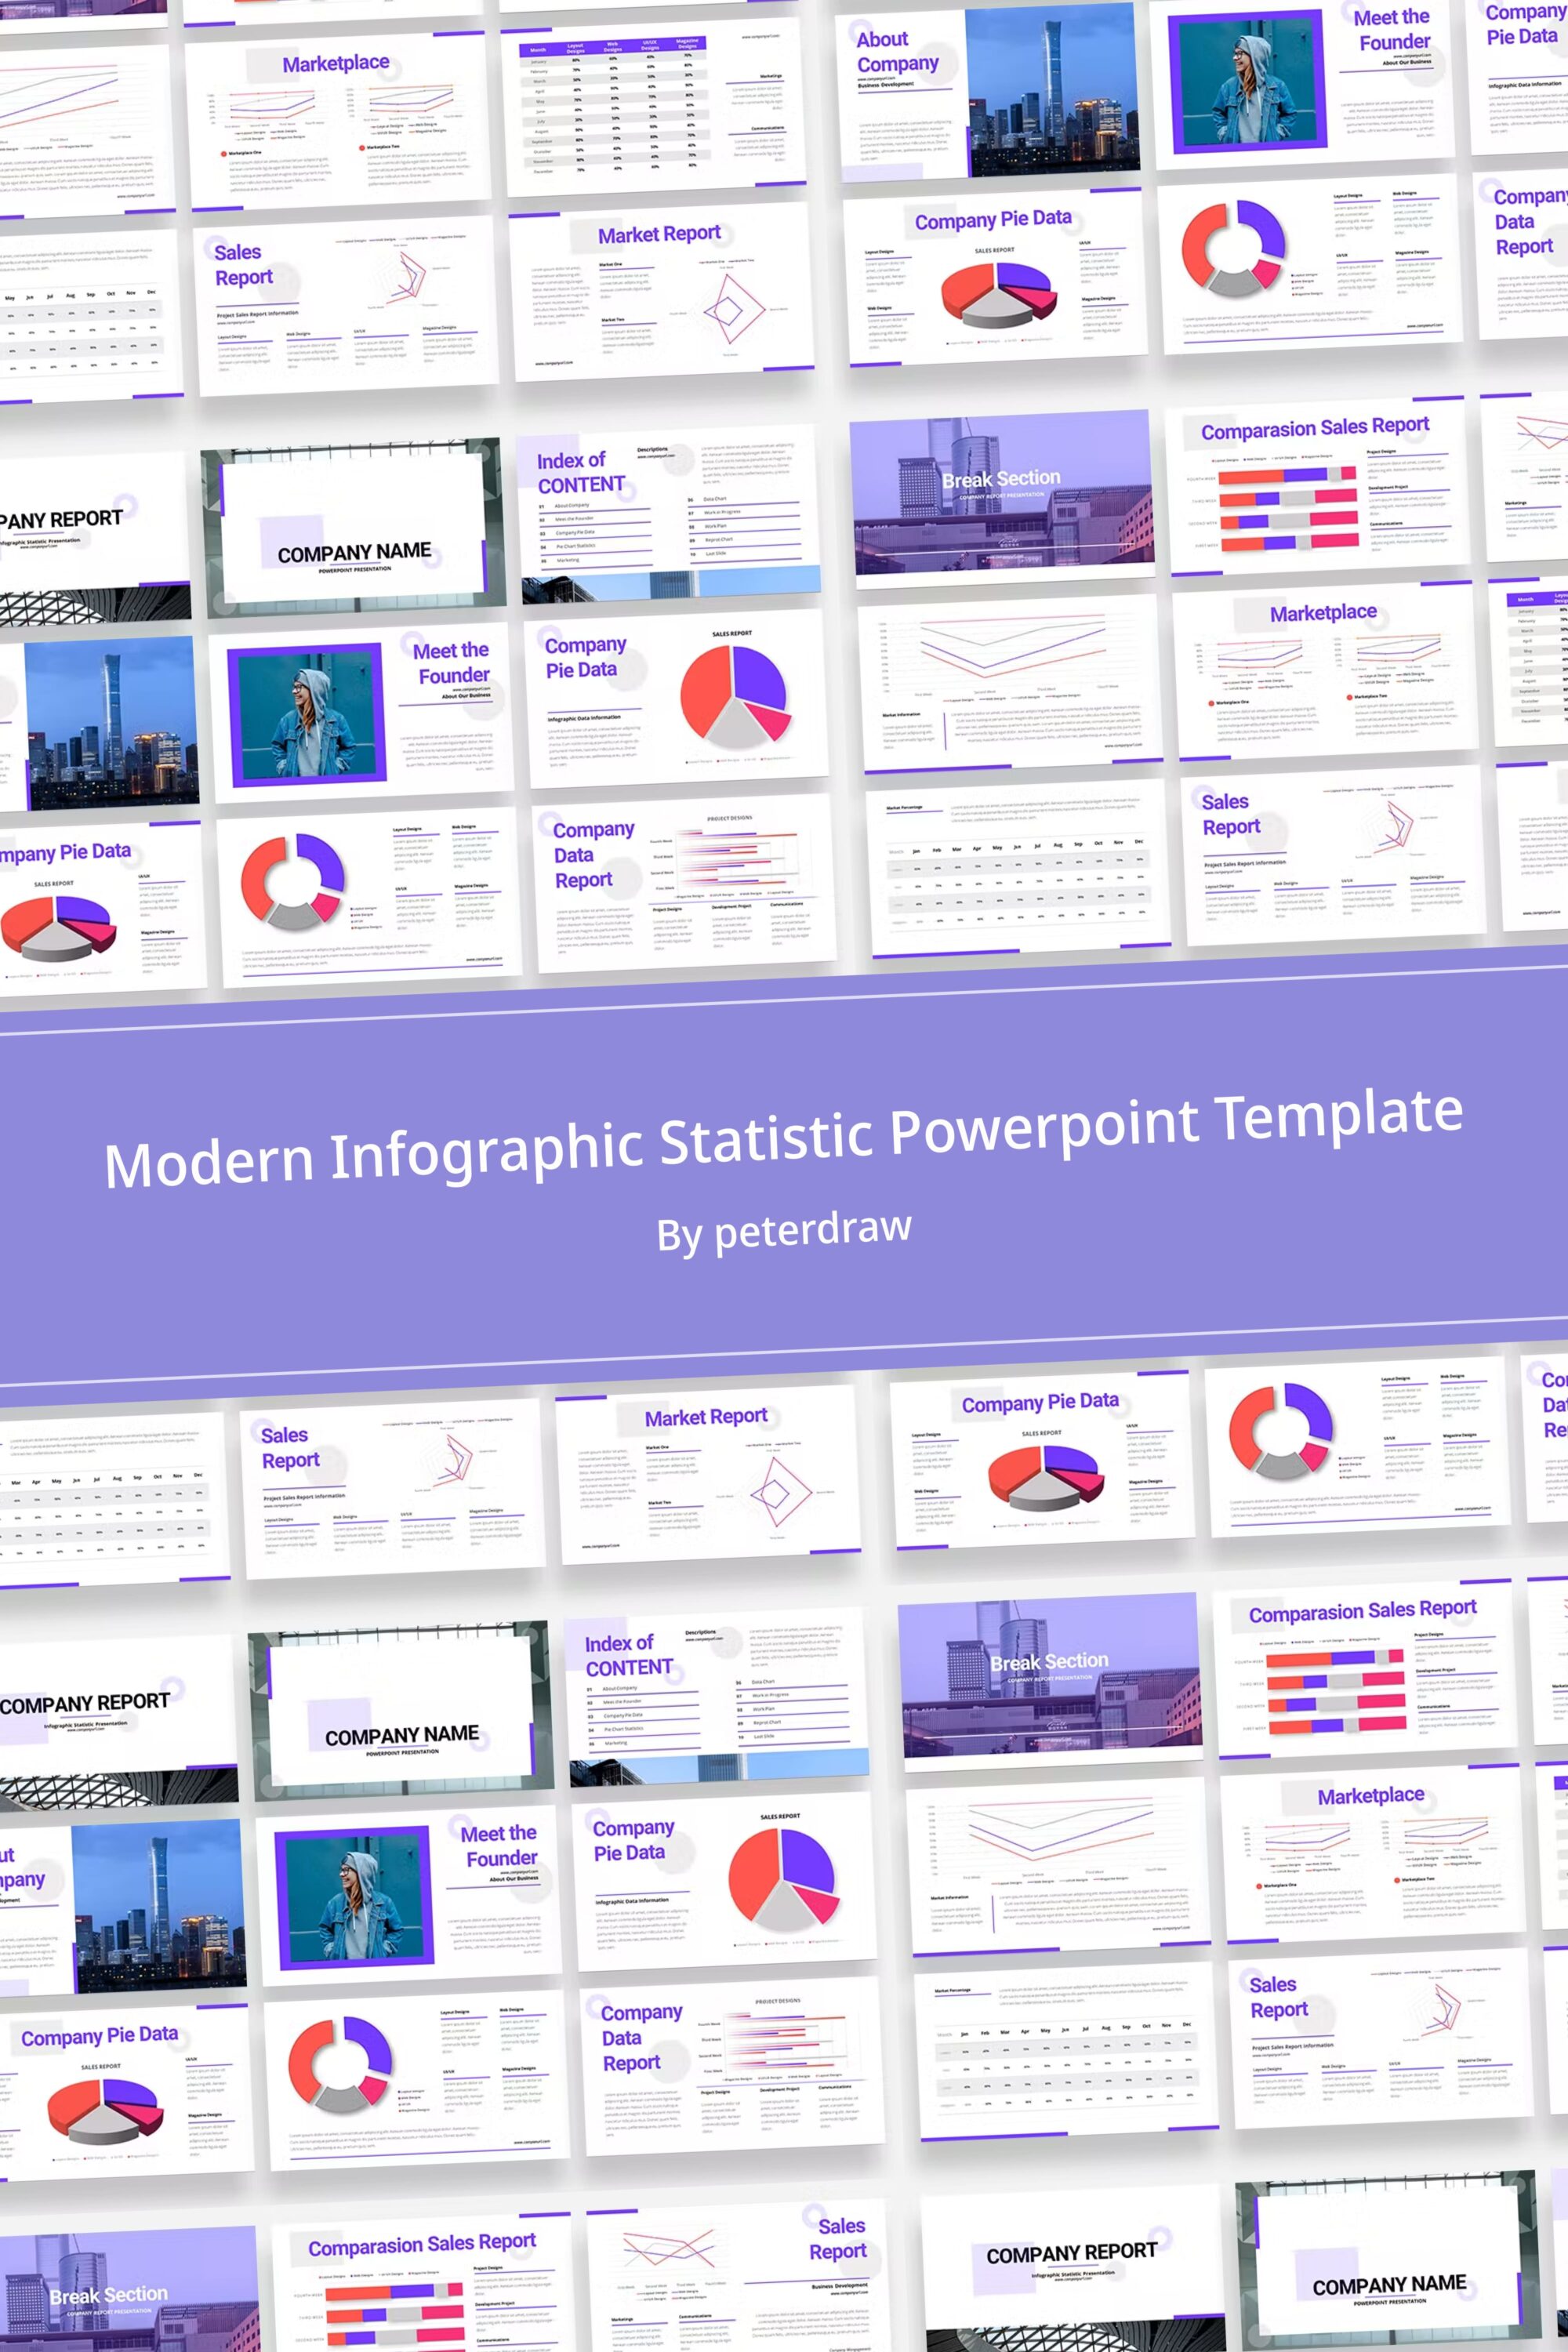 Modern Infographic Statistic Powerpoint Template - pinterest image preview.